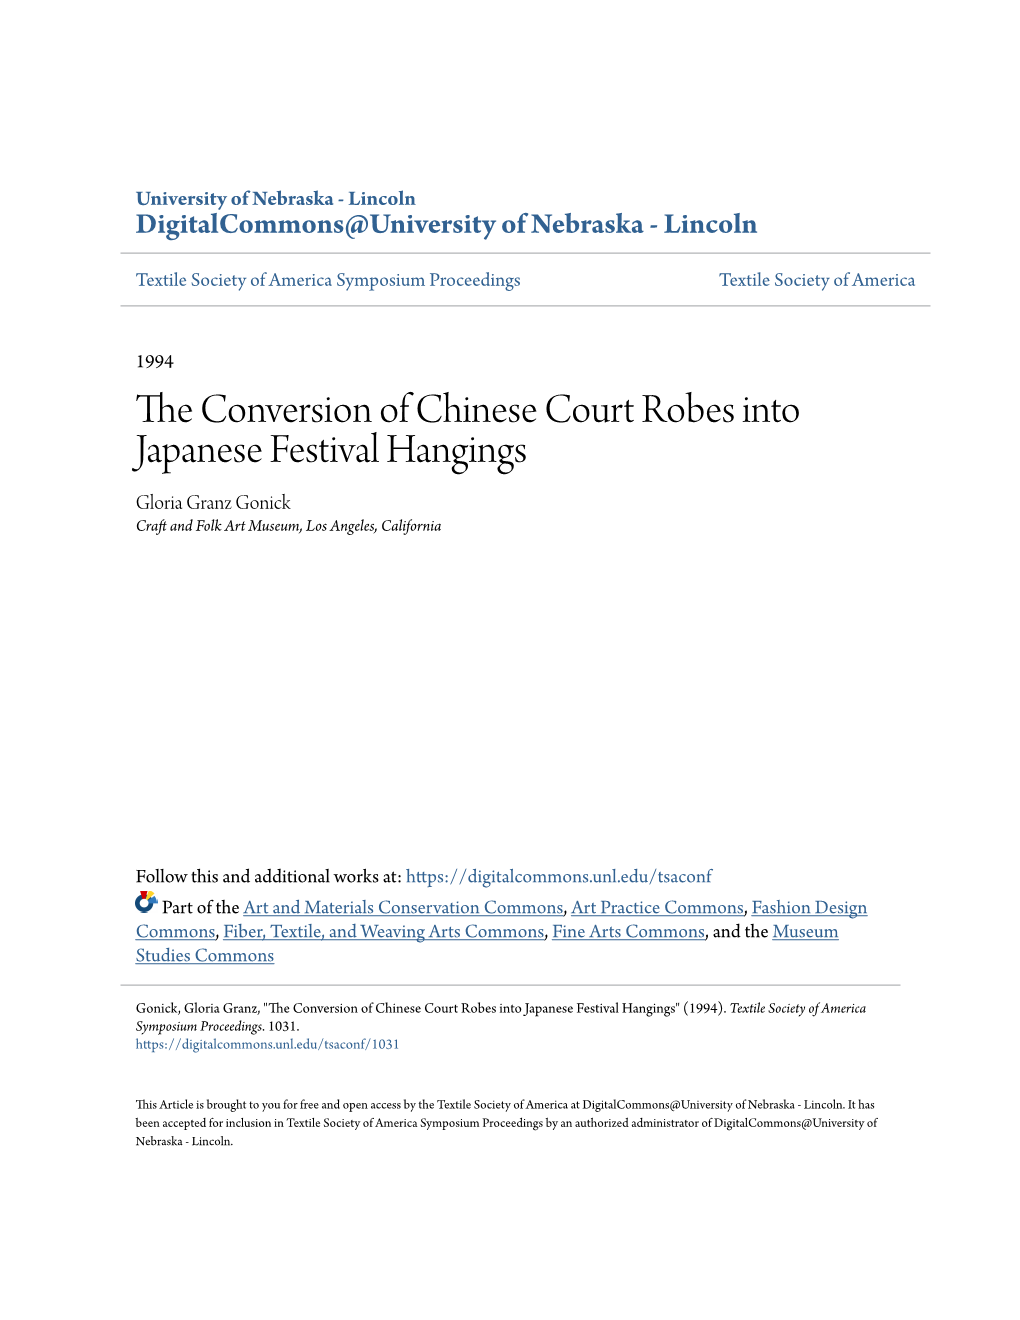 The Conversion of Chinese Court Robes Into Japanese Festival